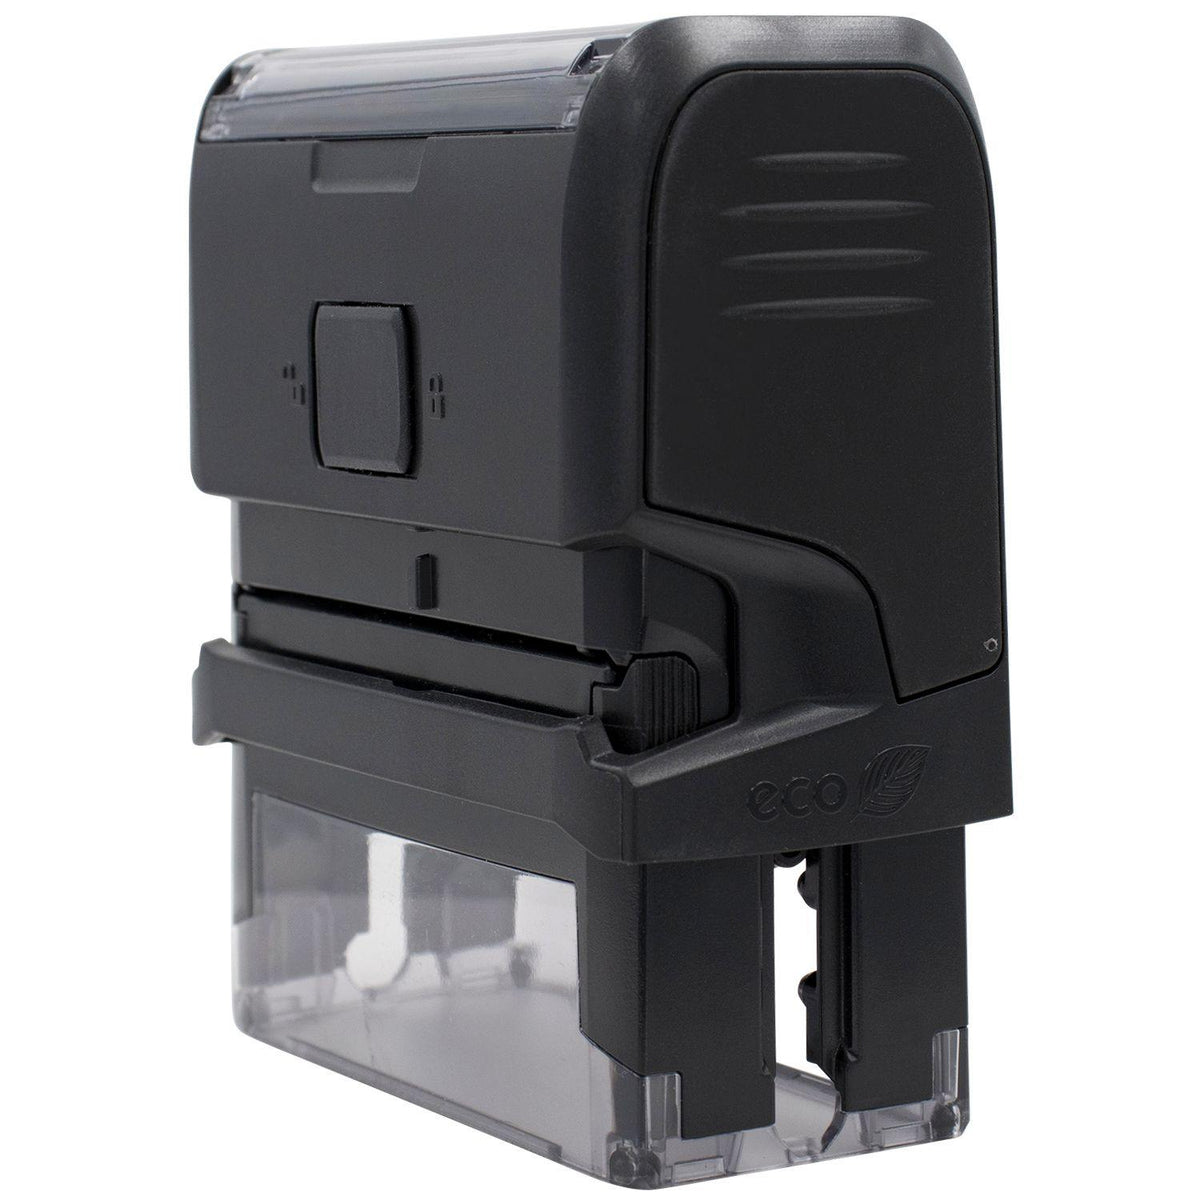 Self-Inking Expreso Stamp - Engineer Seal Stamps - Brand_Trodat, Impression Size_Small, Stamp Type_Self-Inking Stamp, Type of Use_General, Type of Use_Office